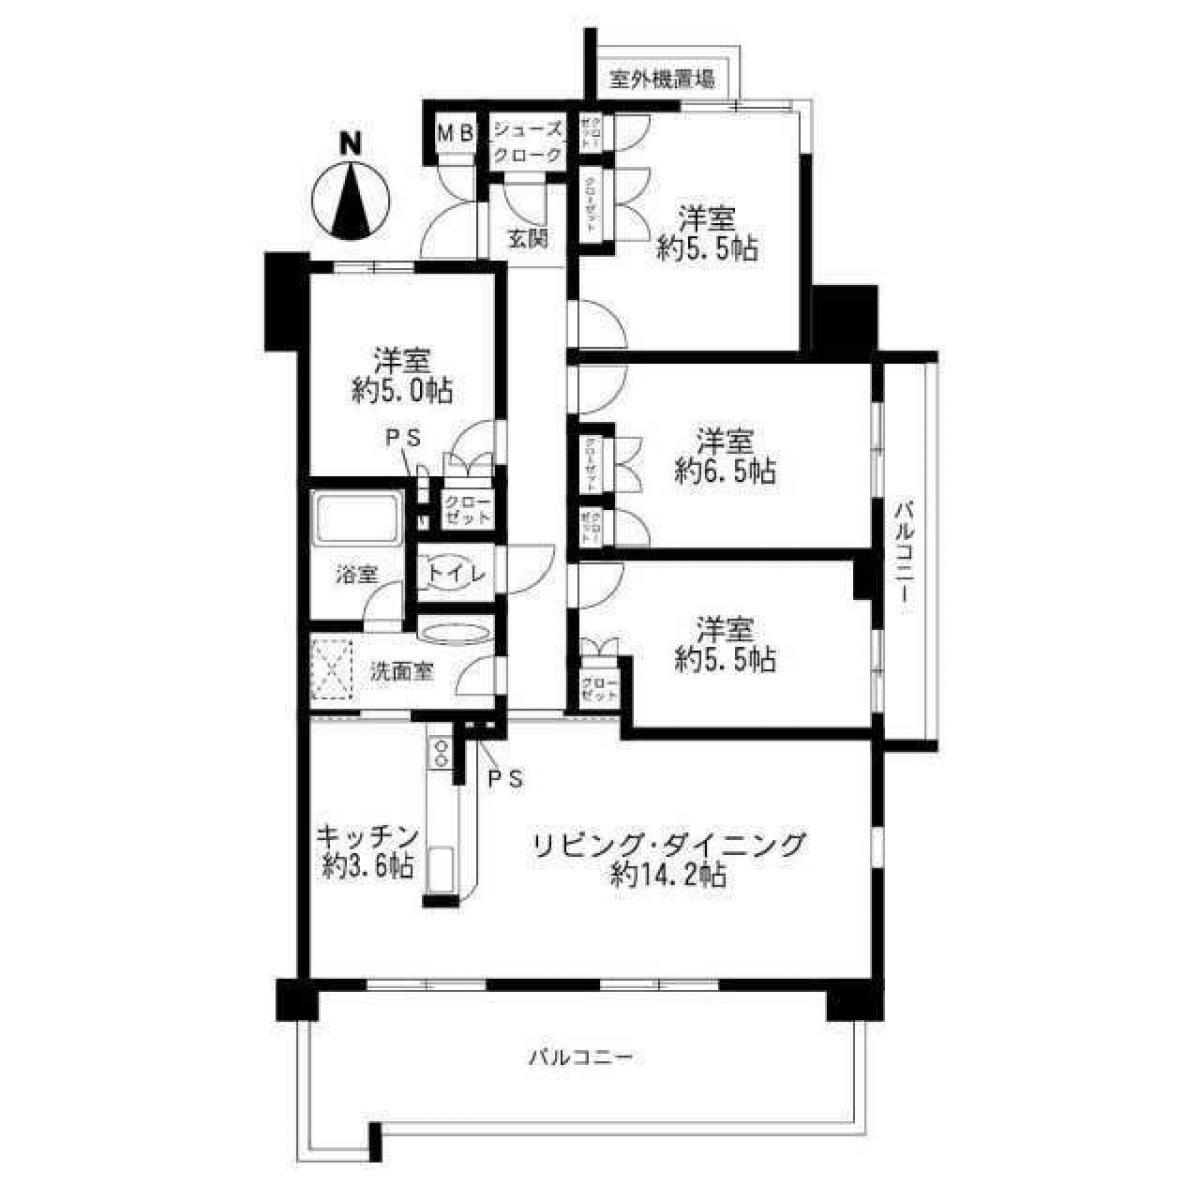 Picture of Apartment For Sale in Nagoya Shi Minato Ku, Aichi, Japan